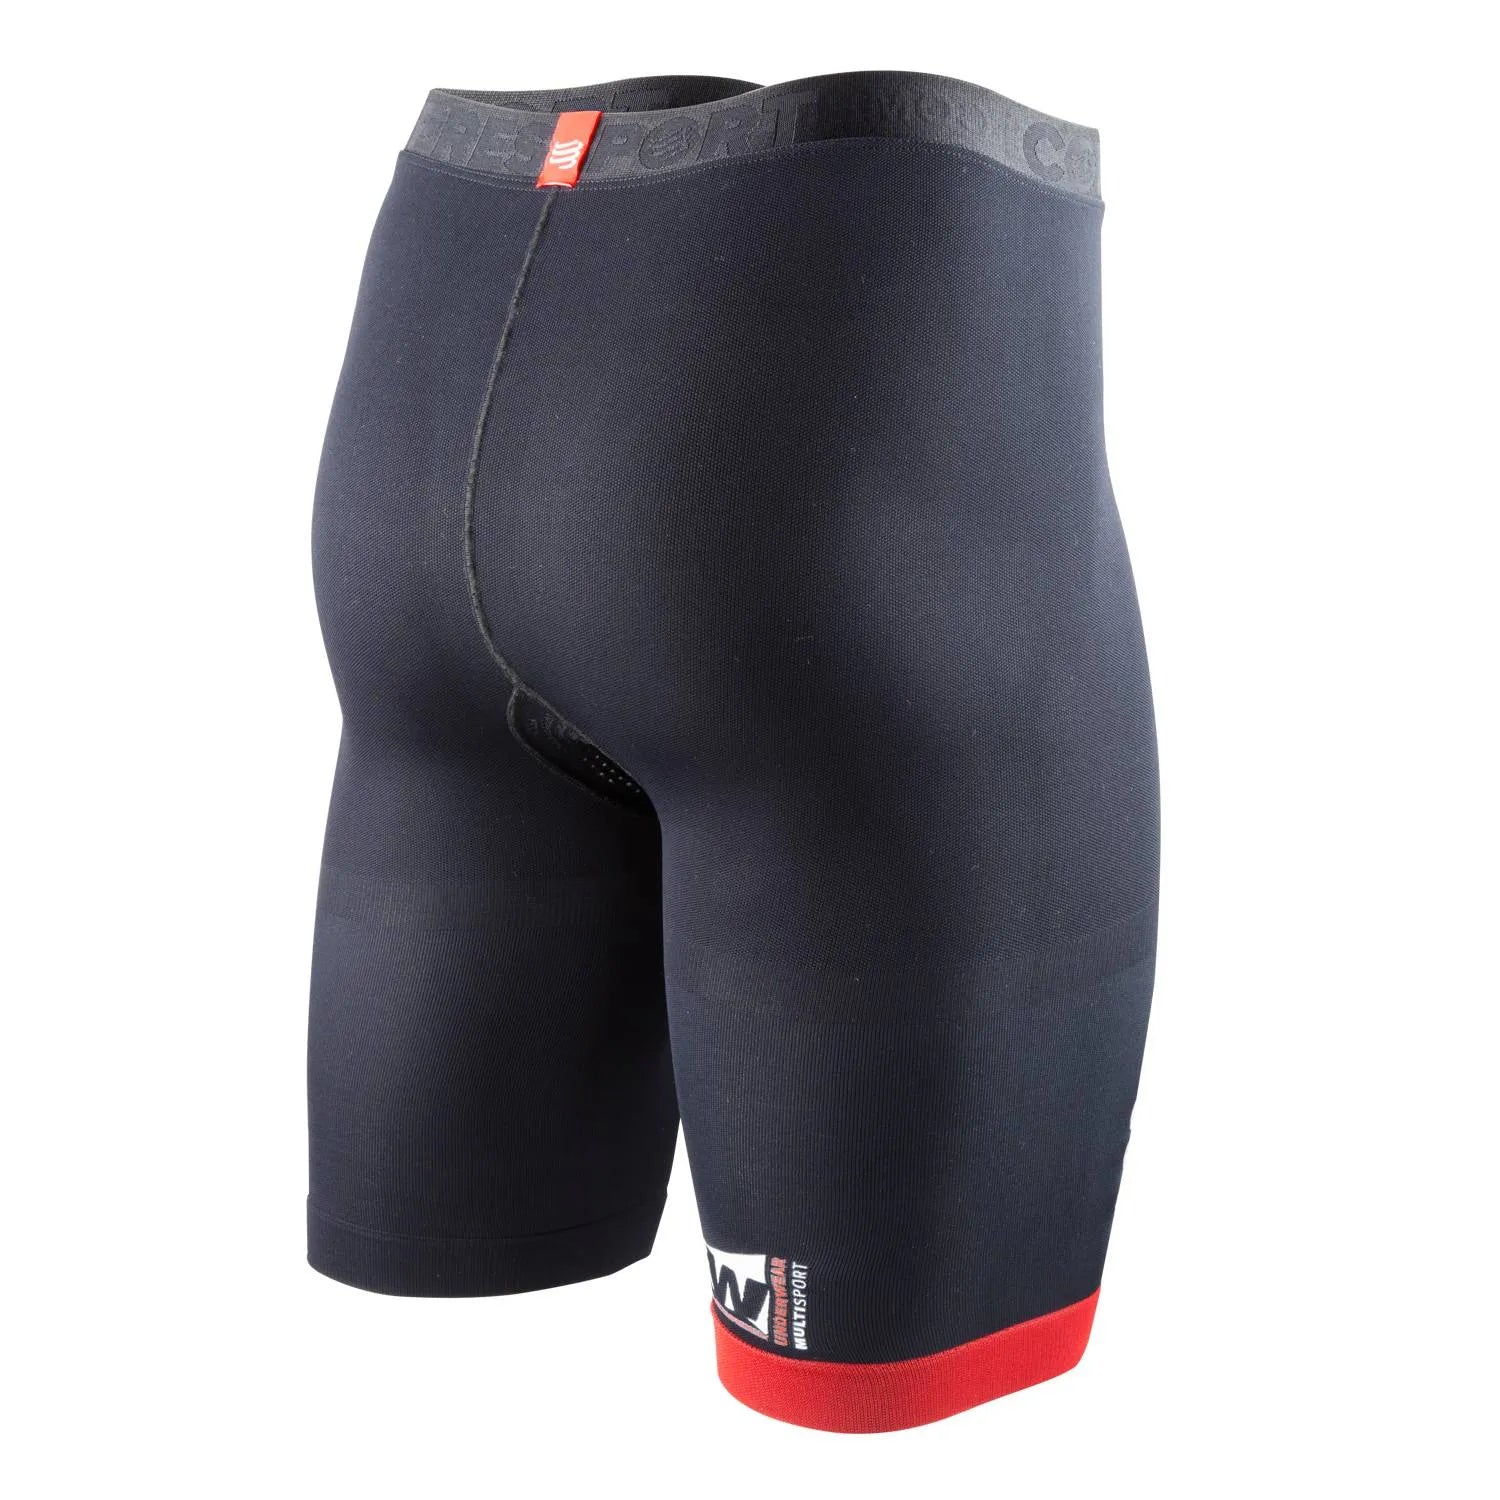 Compressport Multisport Shorts. Men's performance underwear for comfort & support (mention size if relevant).Men's Compression Shorts. Multisport Short V2, running, cycling, training.